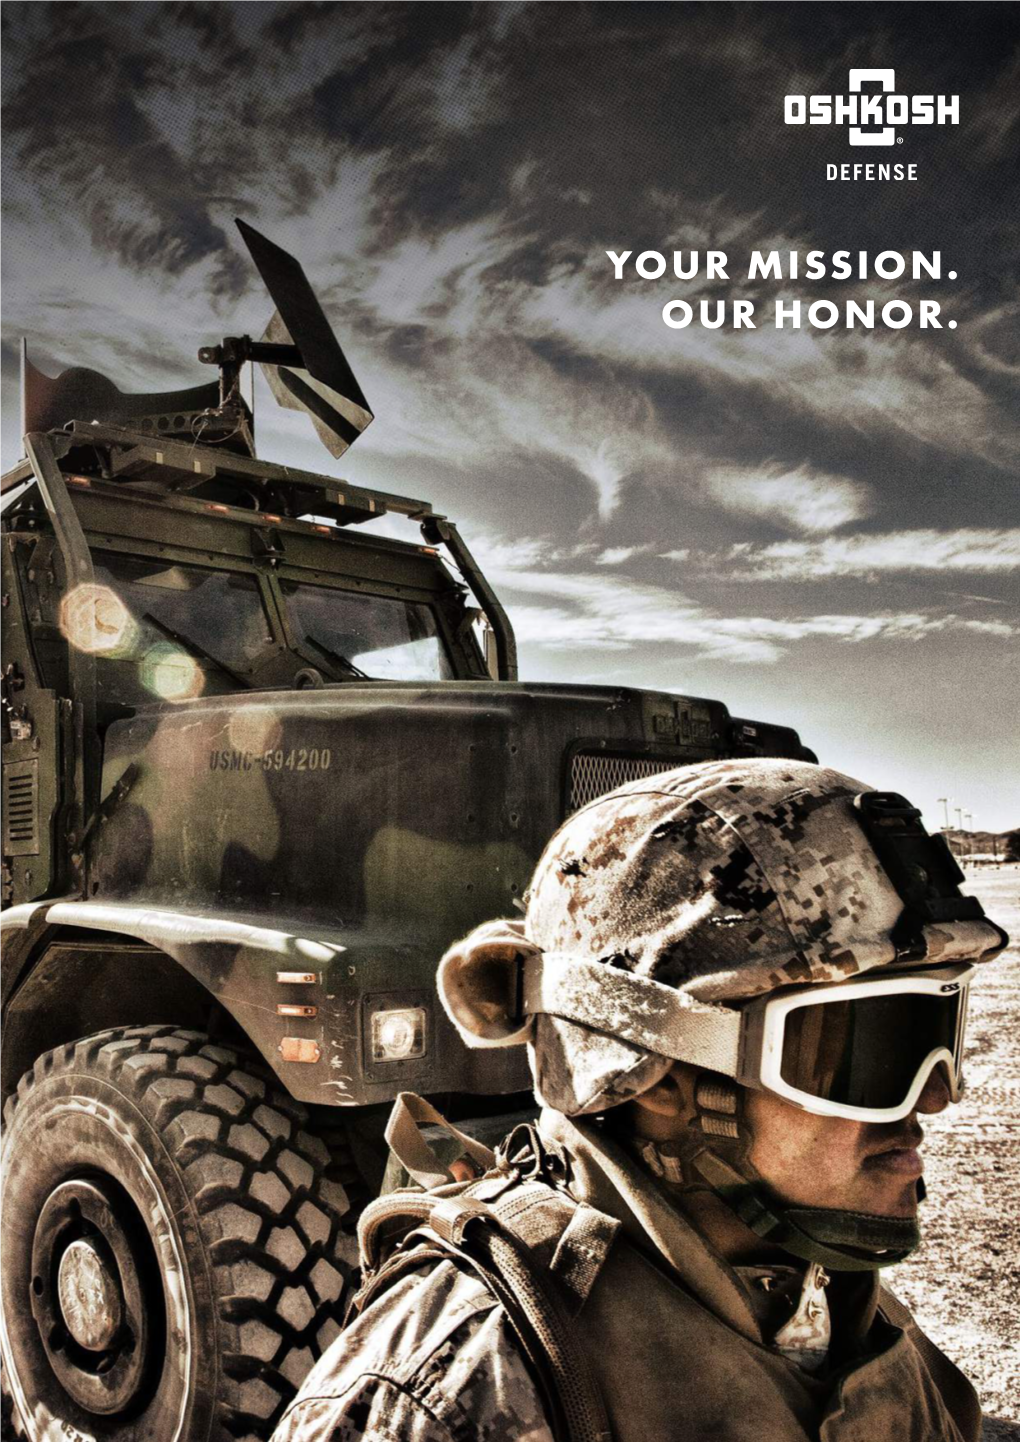 YOUR MISSION. OUR HONOR. This Is Oshkosh Defense